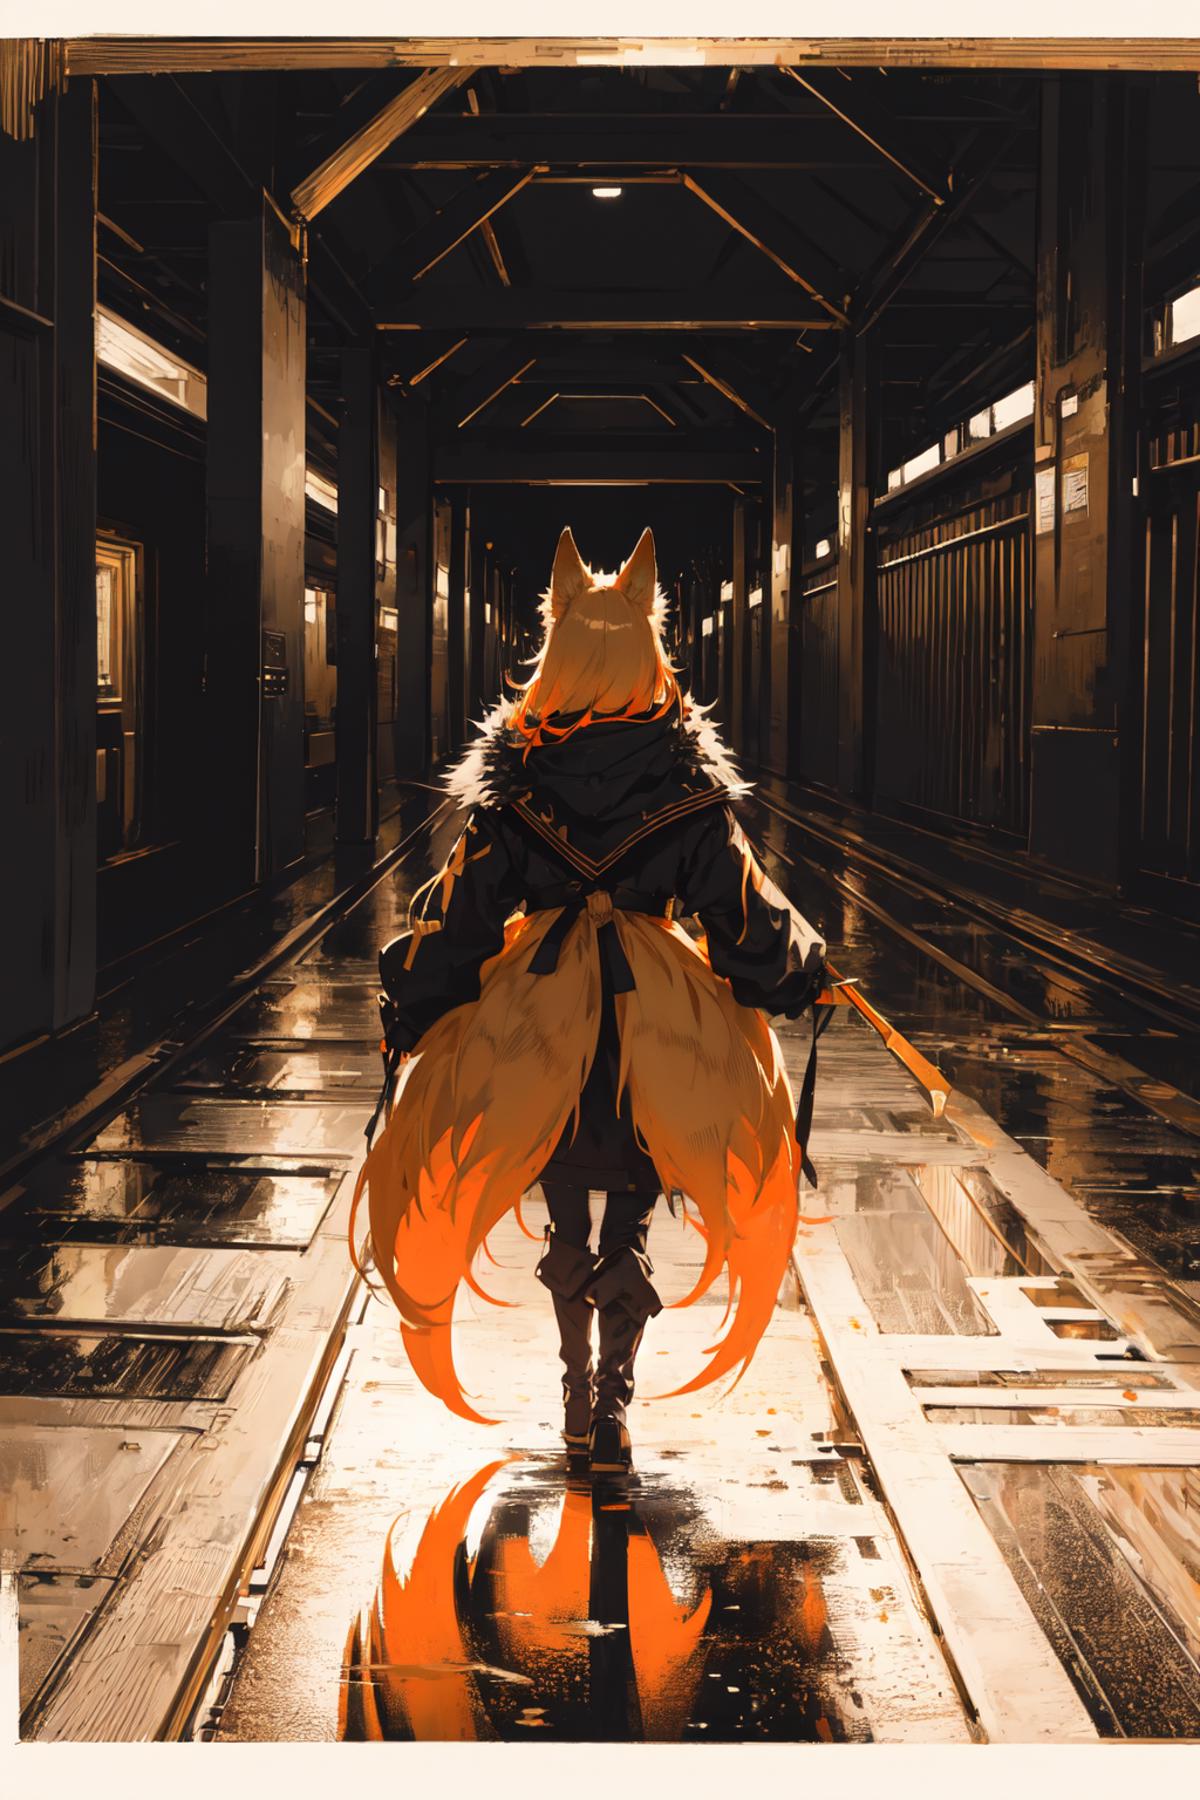 Tails Fixer (from behind) | Concept / Tools LyCORIS image by Junbegun